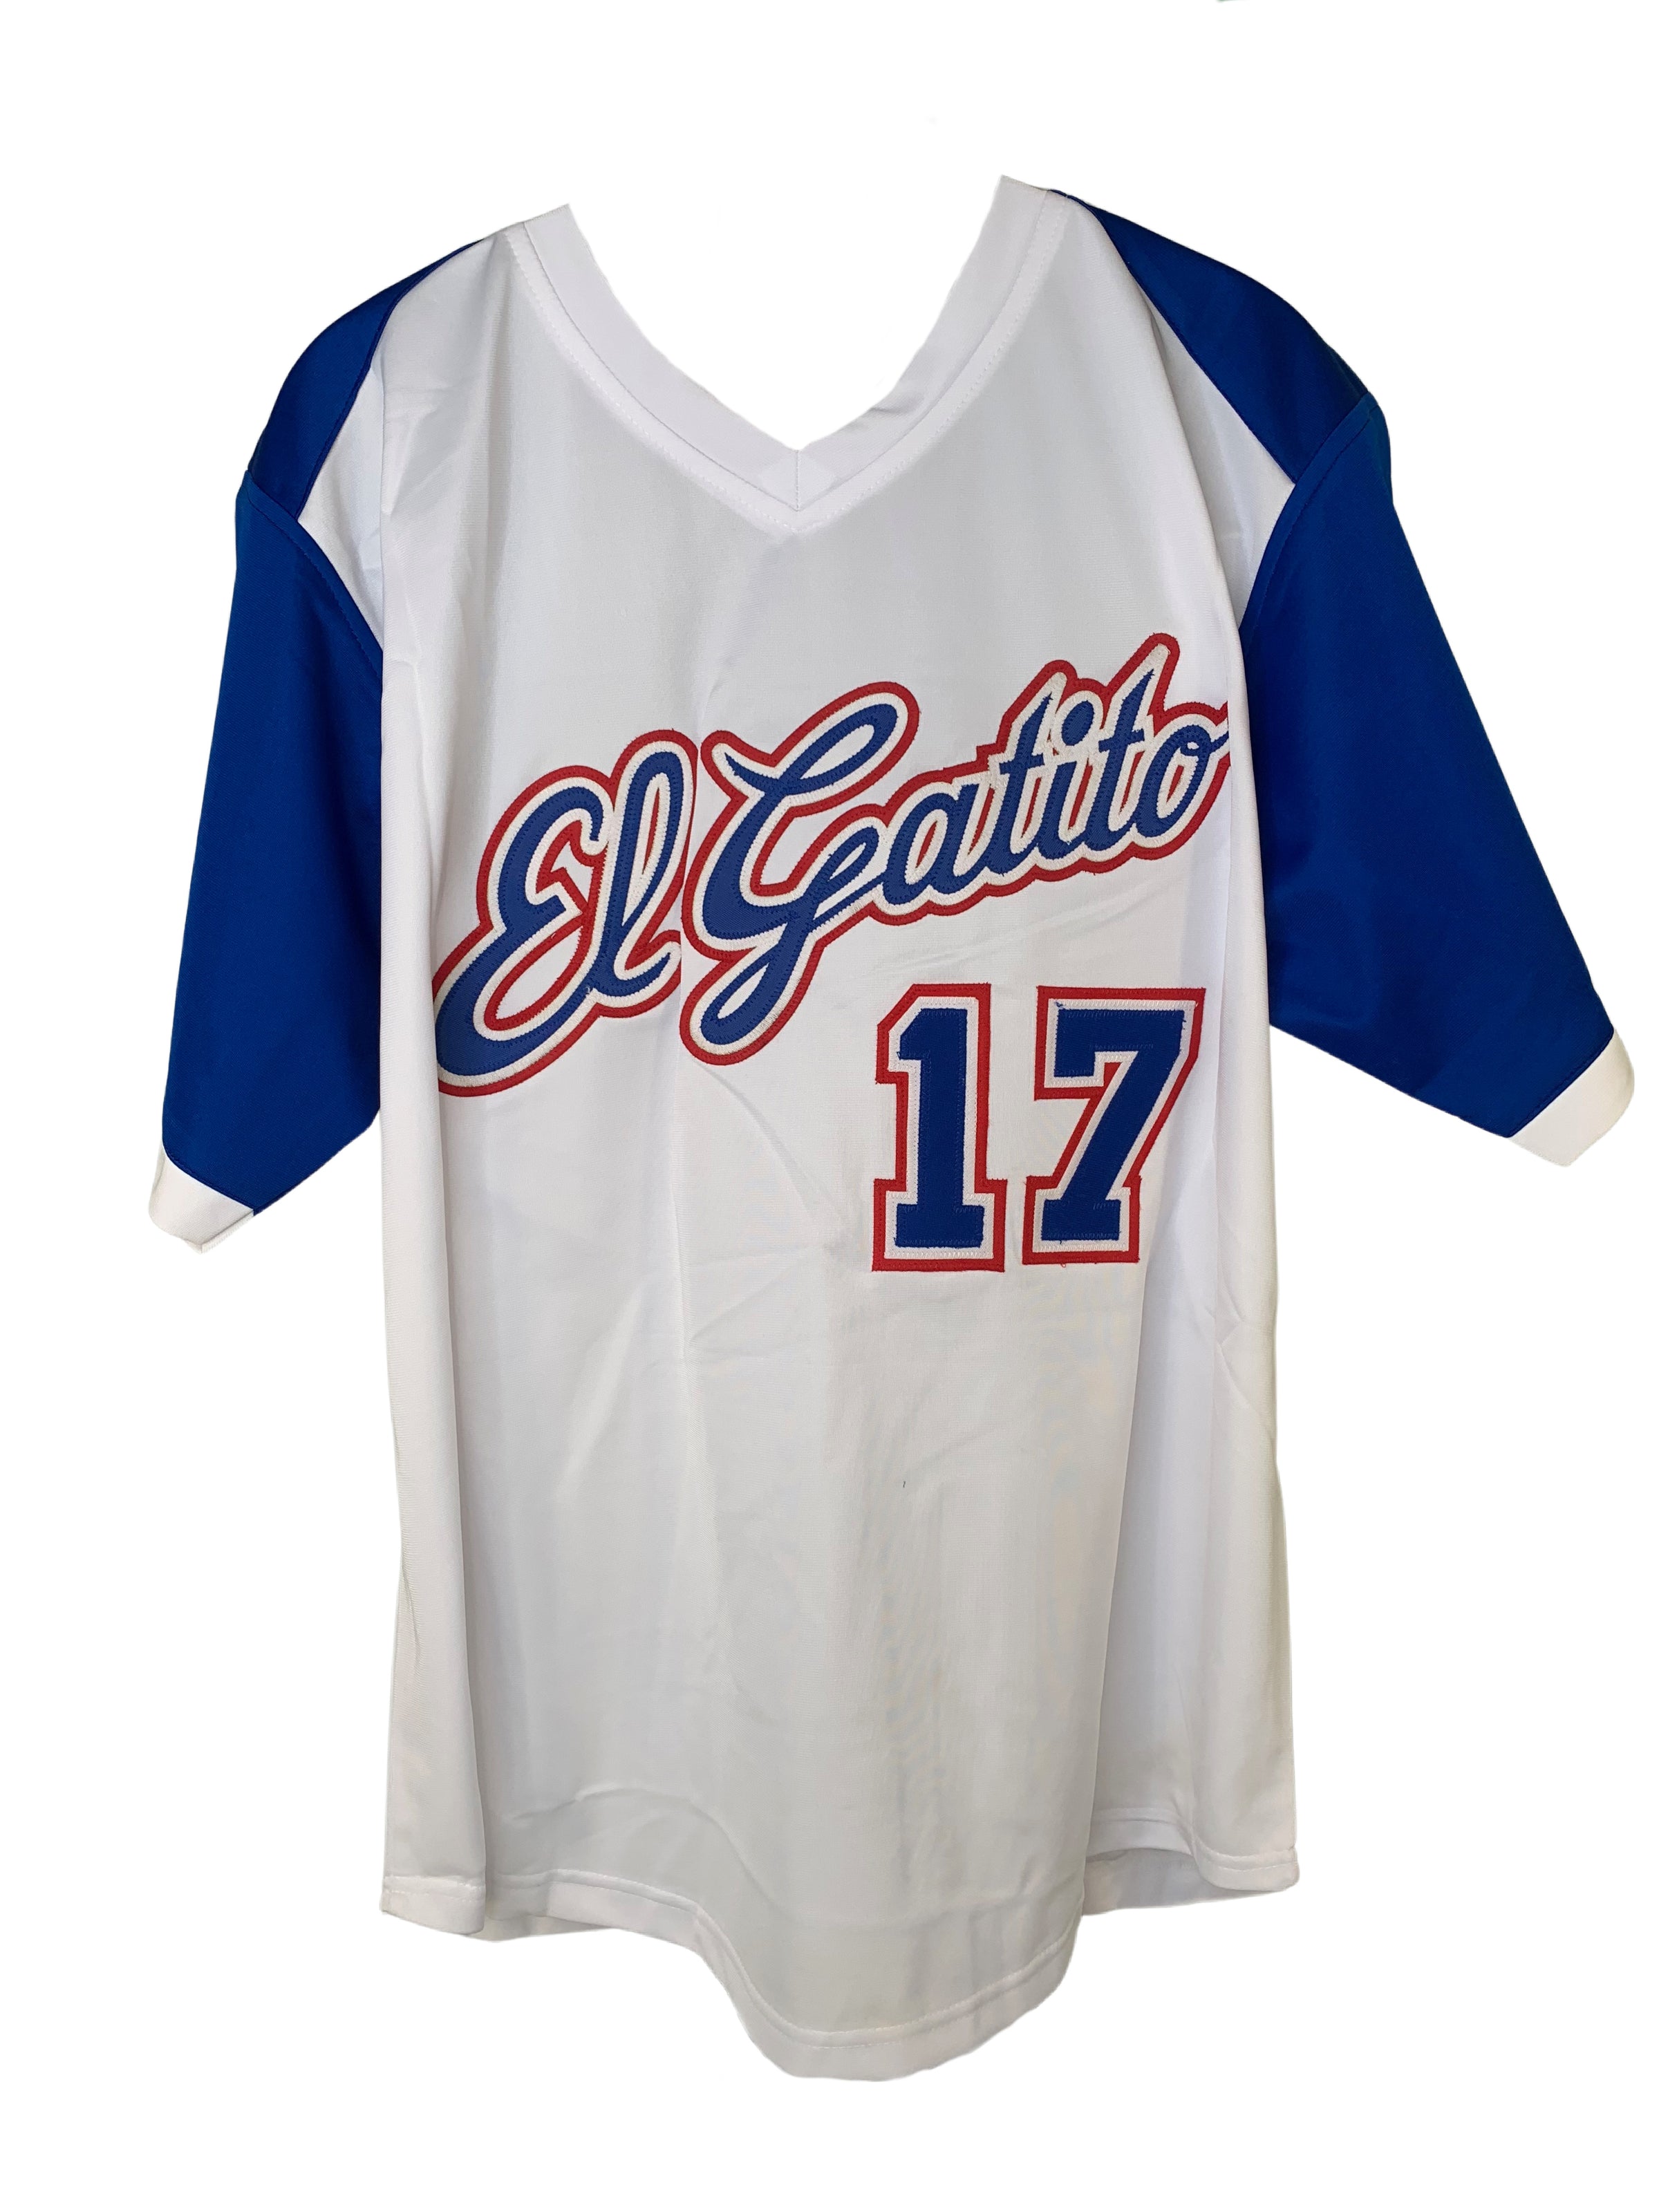 braves autographed jersey